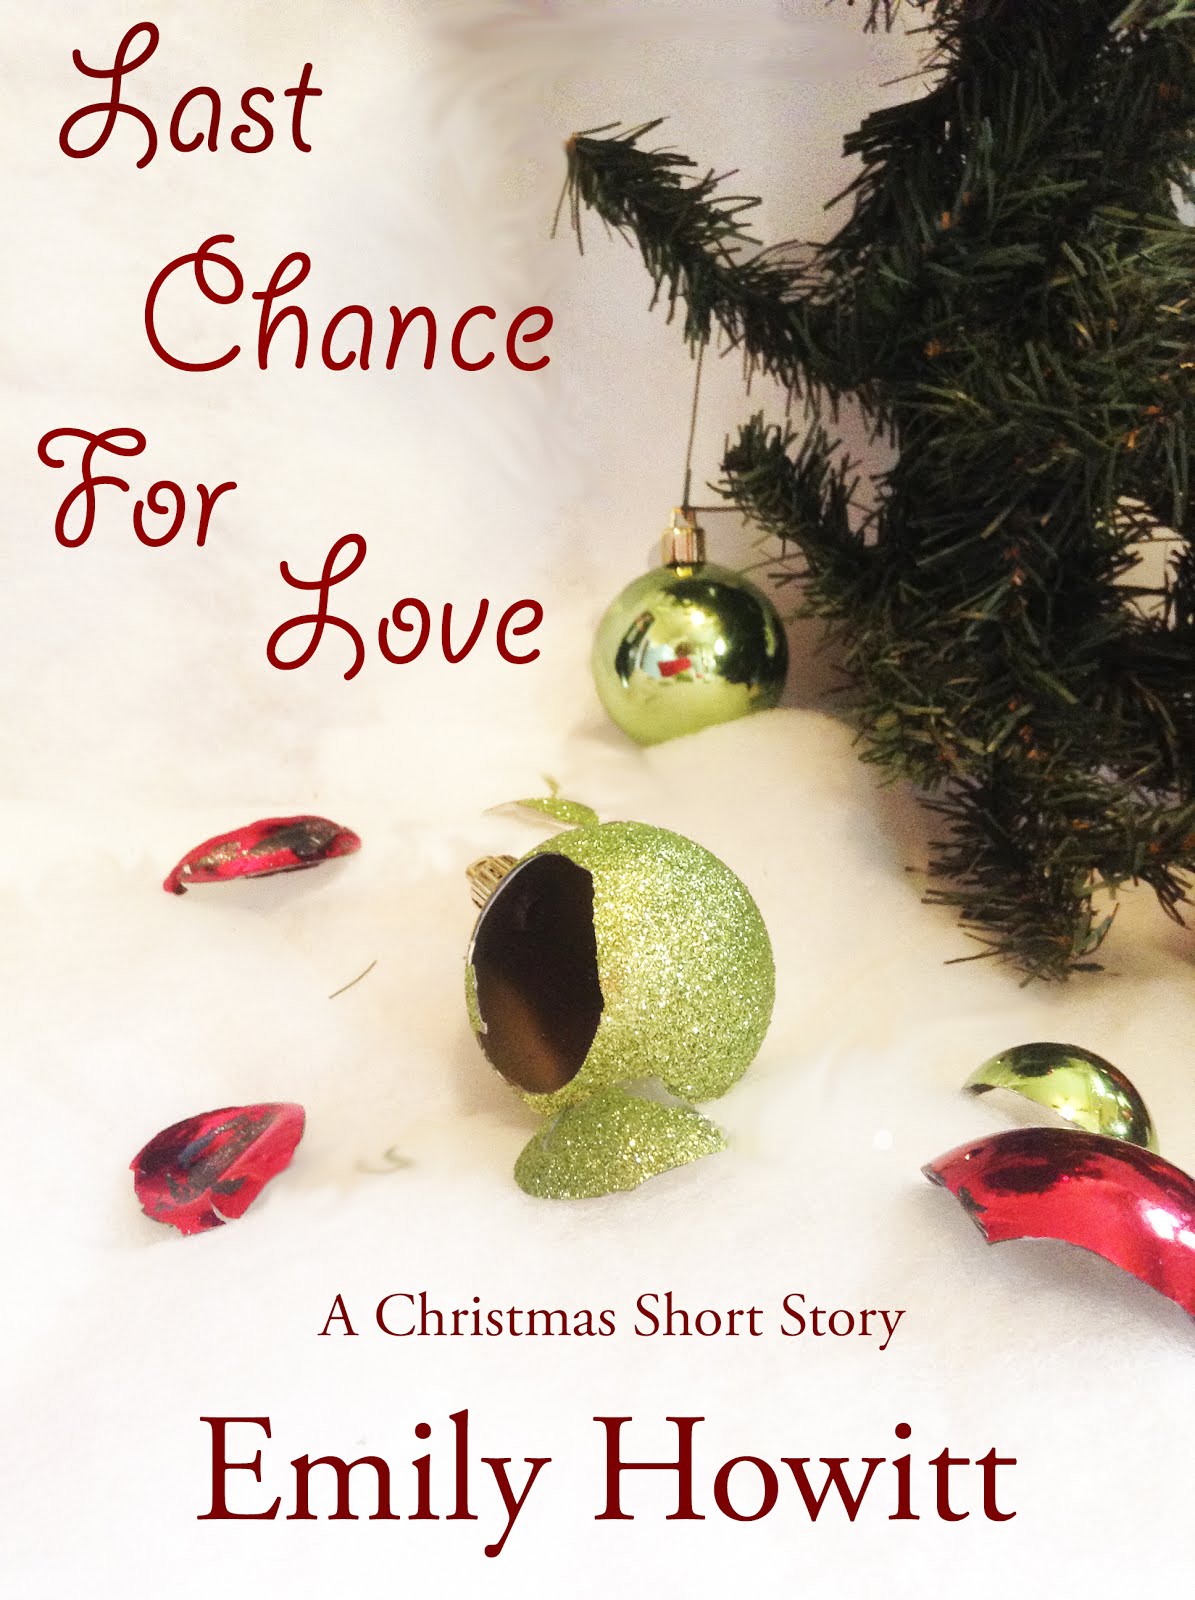 Last Chance for love